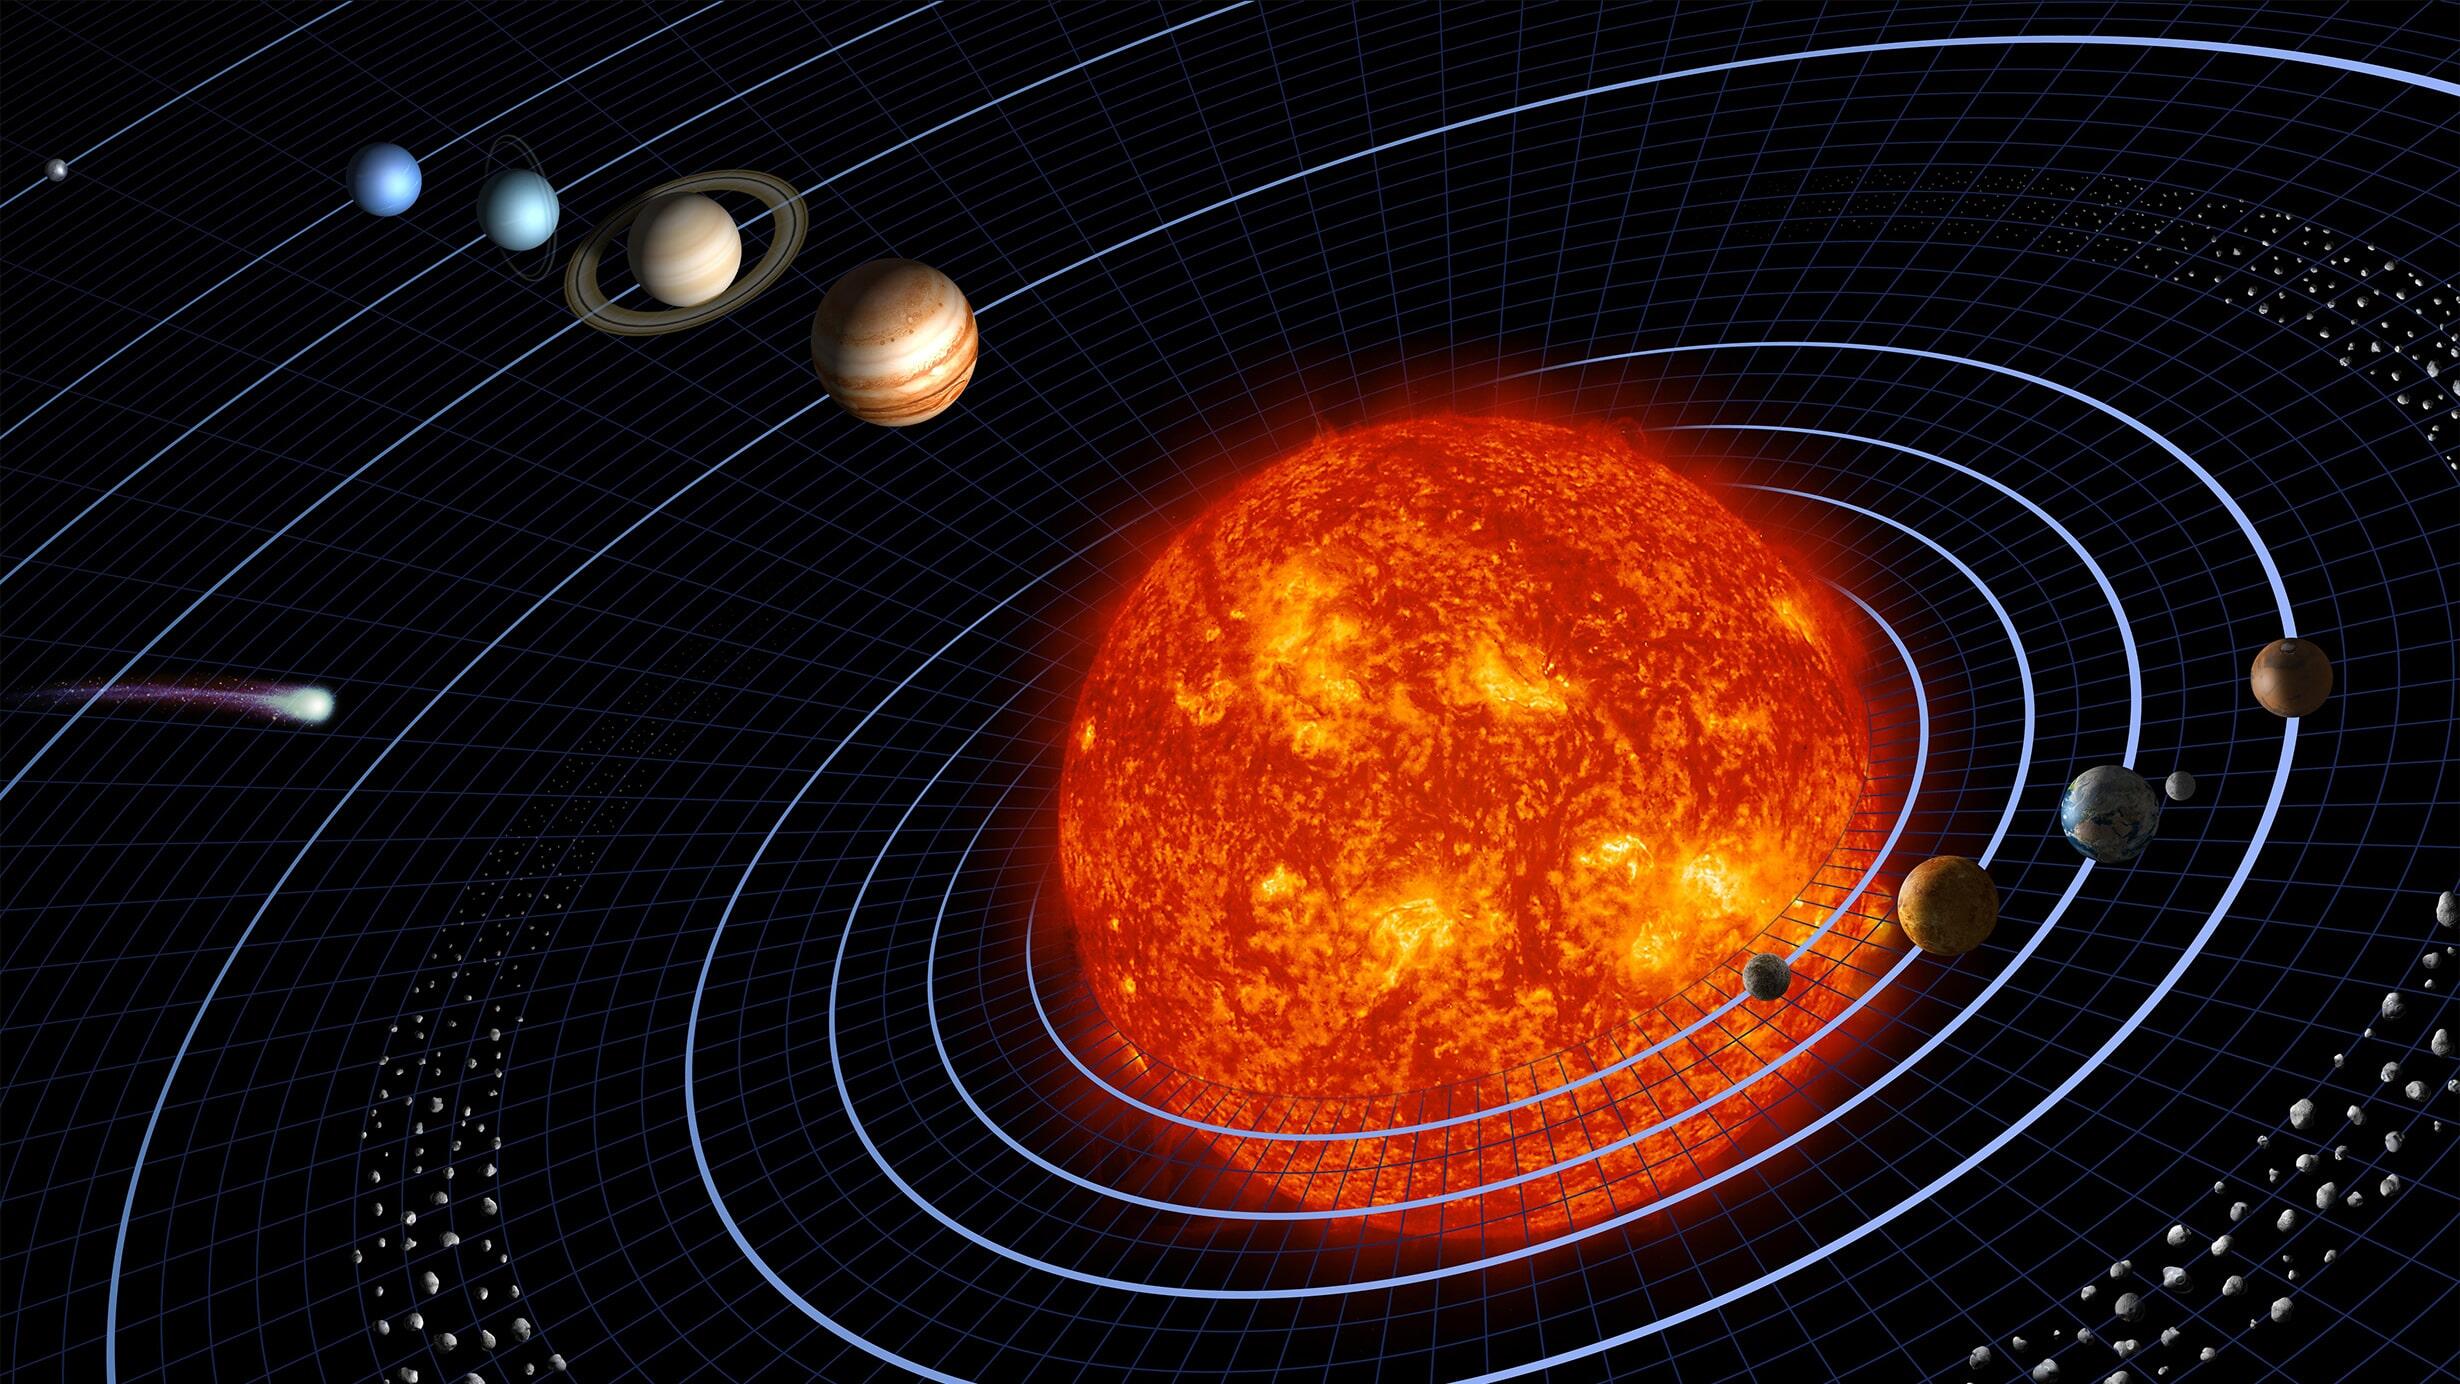 An artist's depiction of the solar system, with eight planets in concentric orbits around the sun.